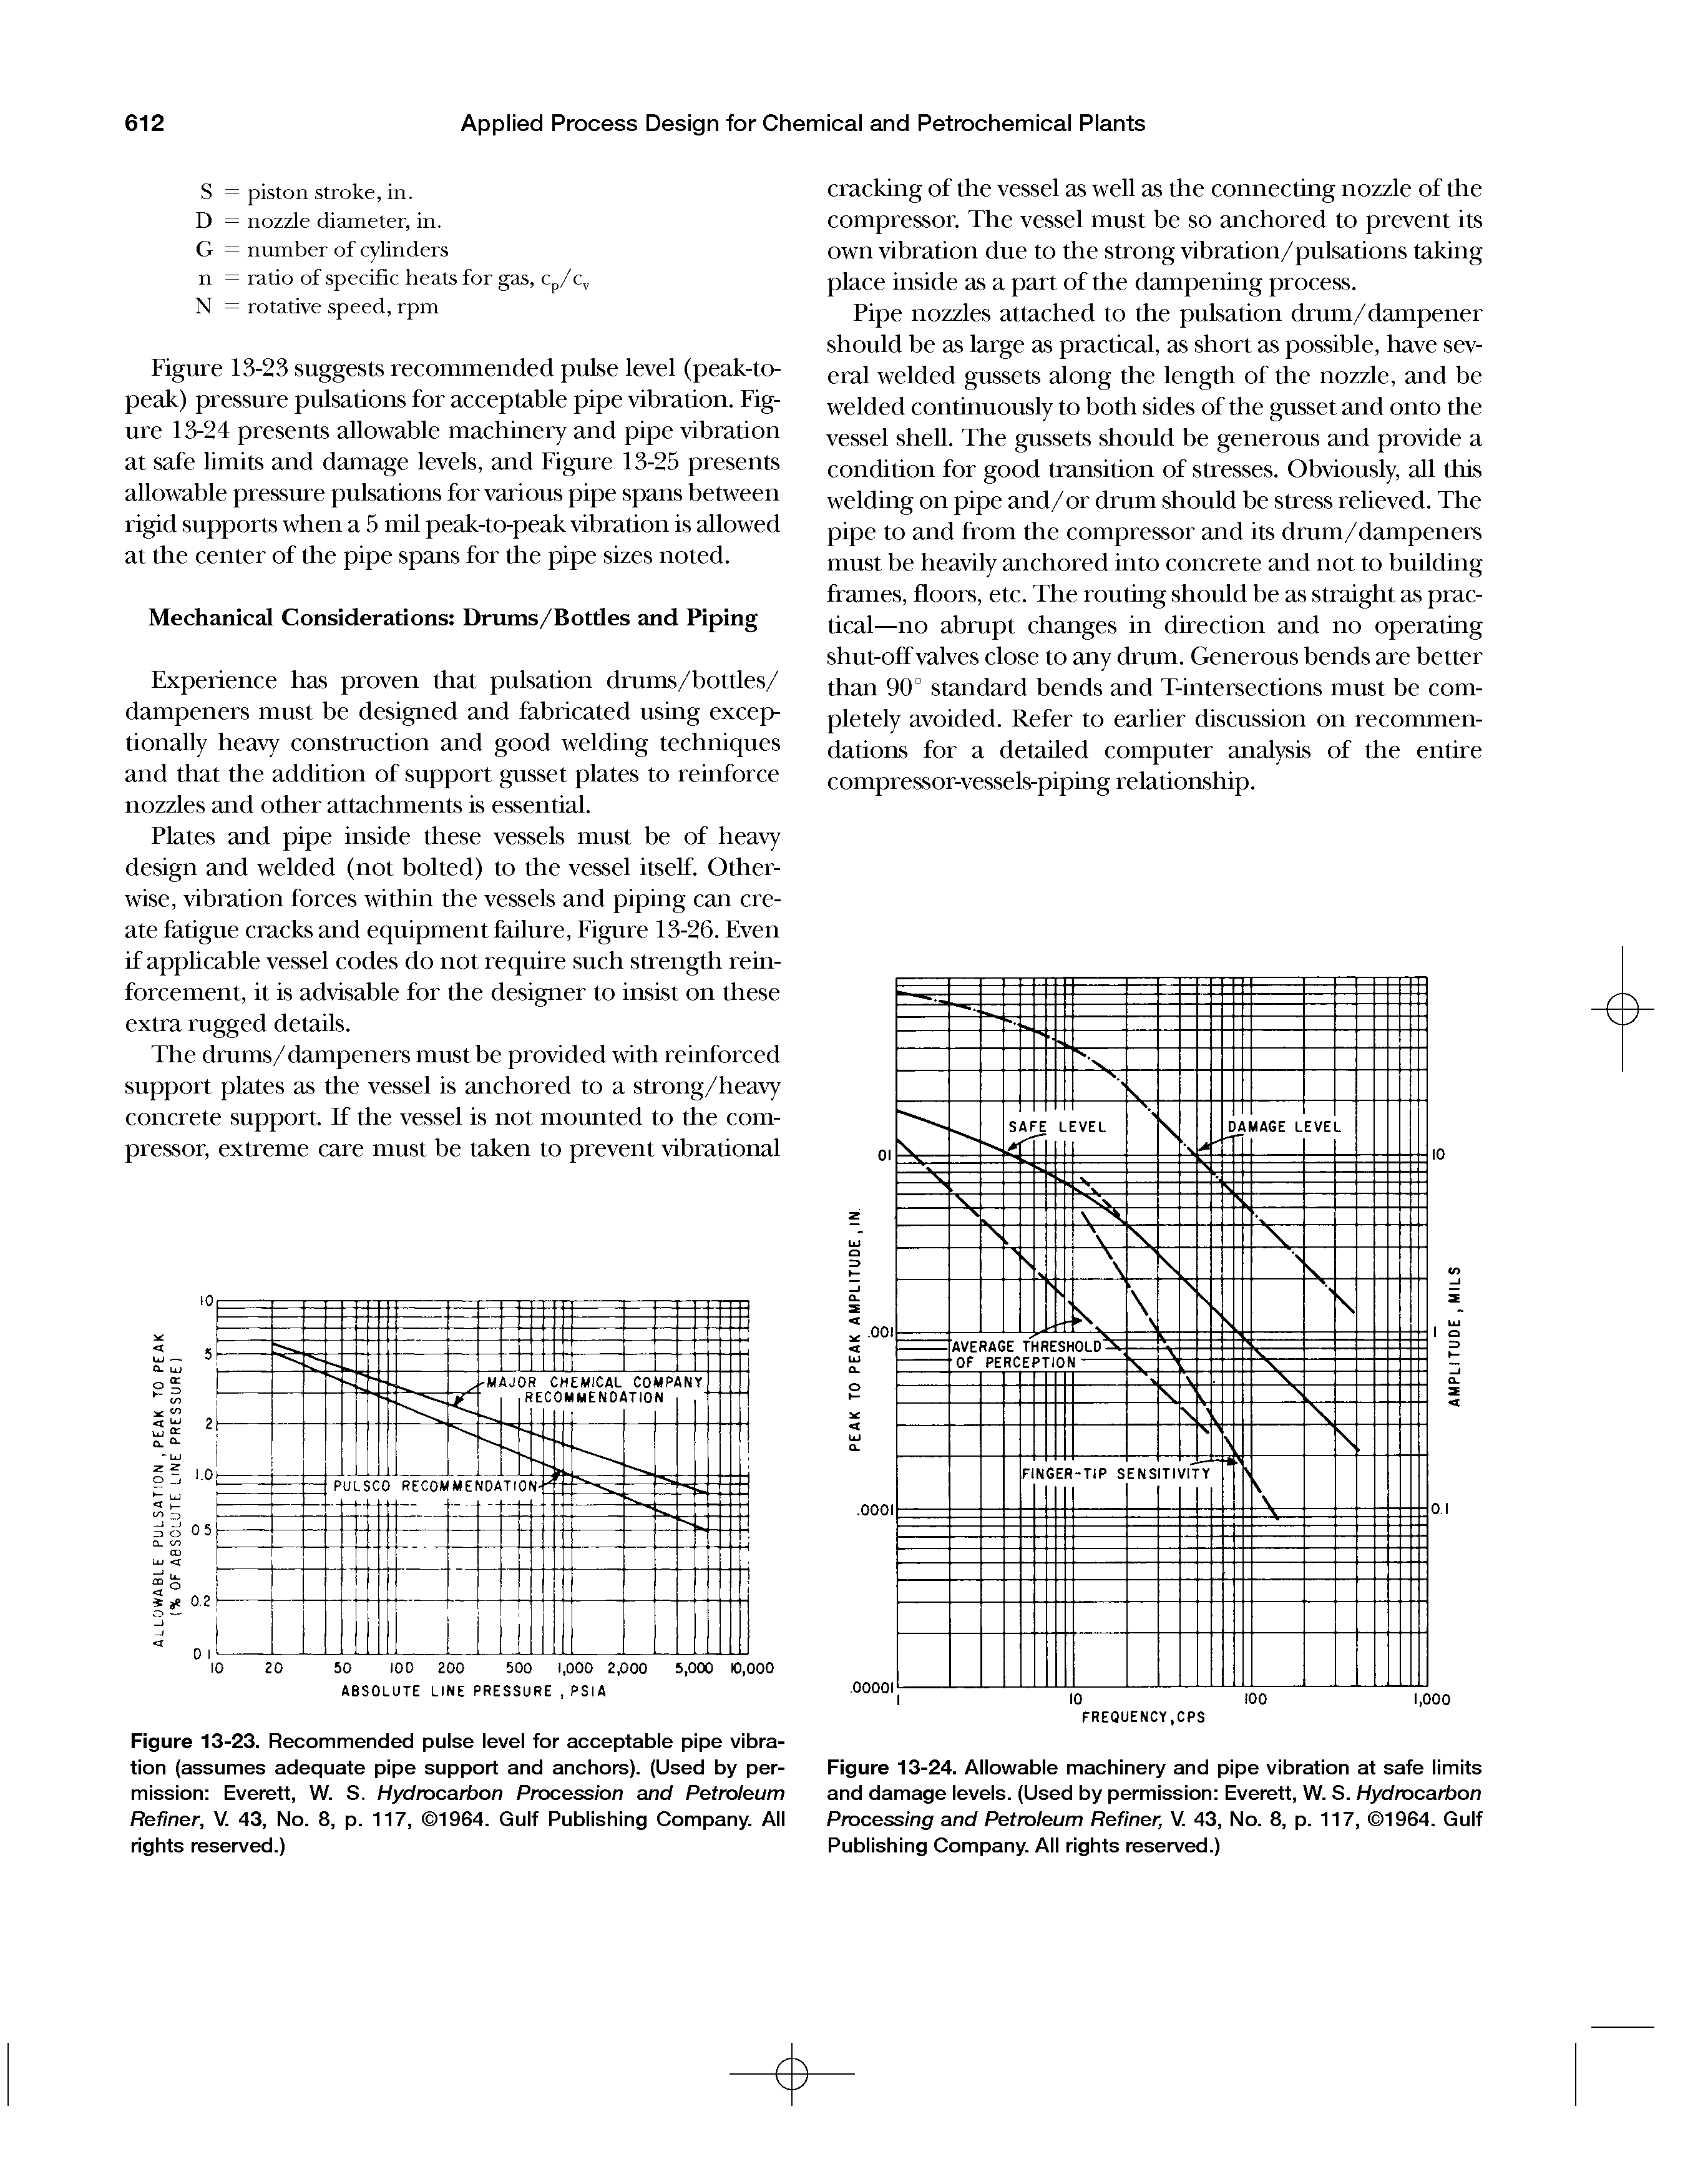 Figure 13-24. Allowable machinery and pipe vibration at safe iimits and damage ieveis. (Used by permission Everett, W. S. Hydrocarbon Processing and Petroleum Refiner, V. 43, No. 8, p. 117, 1964. Guif Pubiishing Company. Aii rights reserved.)...